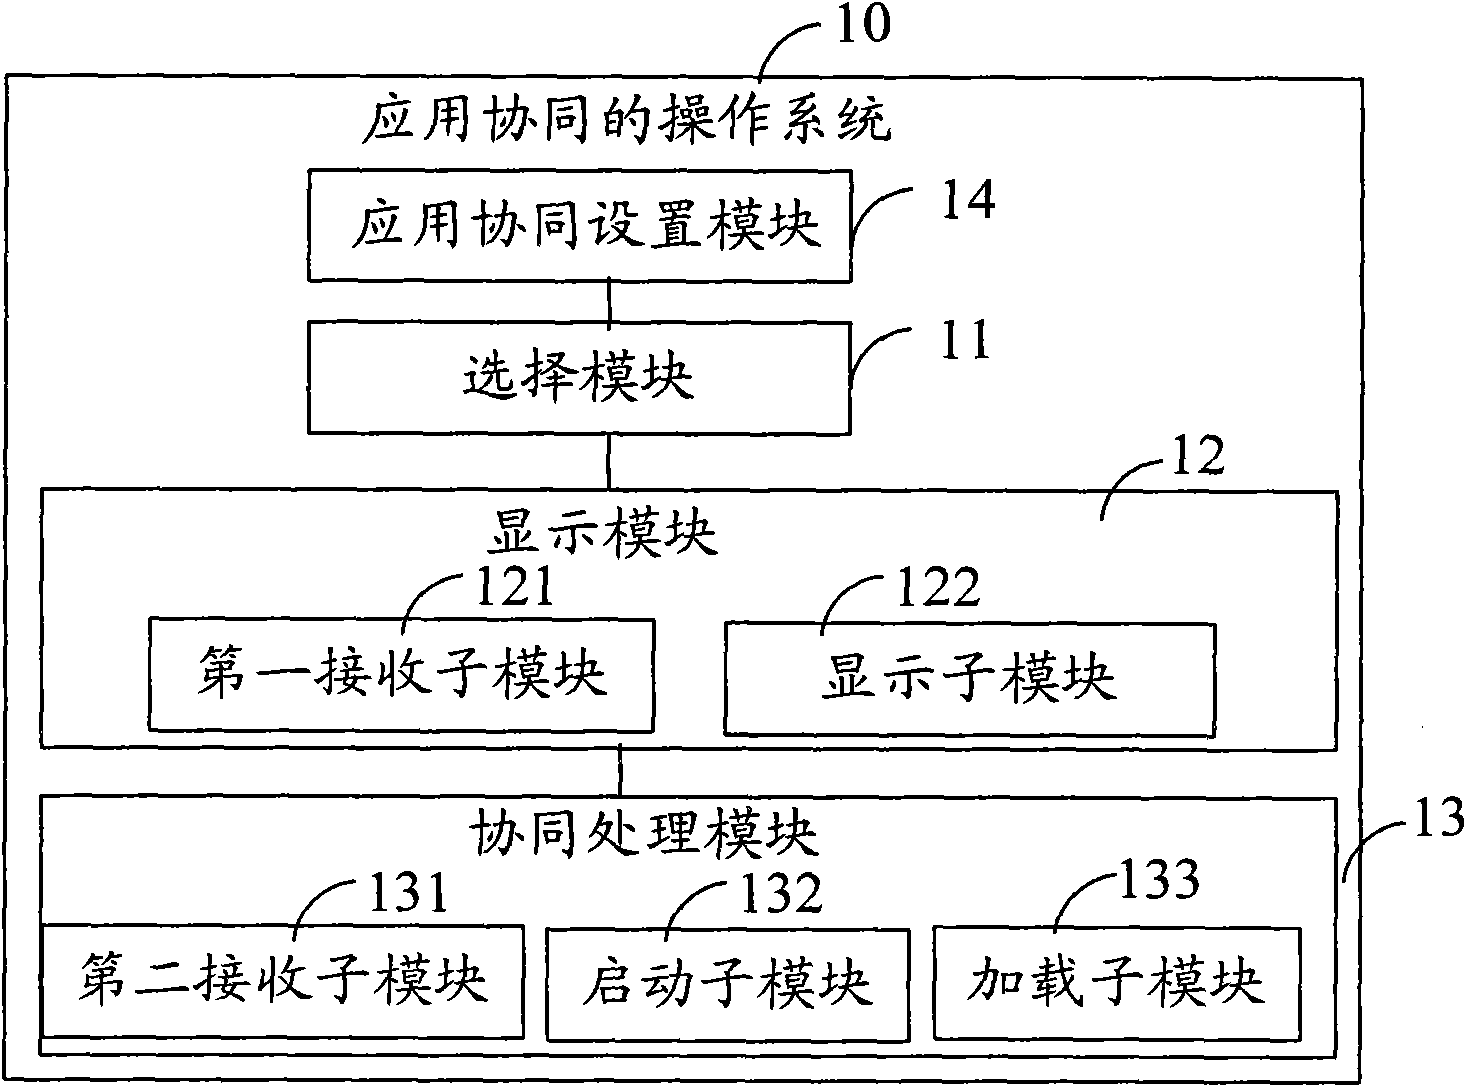 Operating method and system for application coordination and mobile terminal